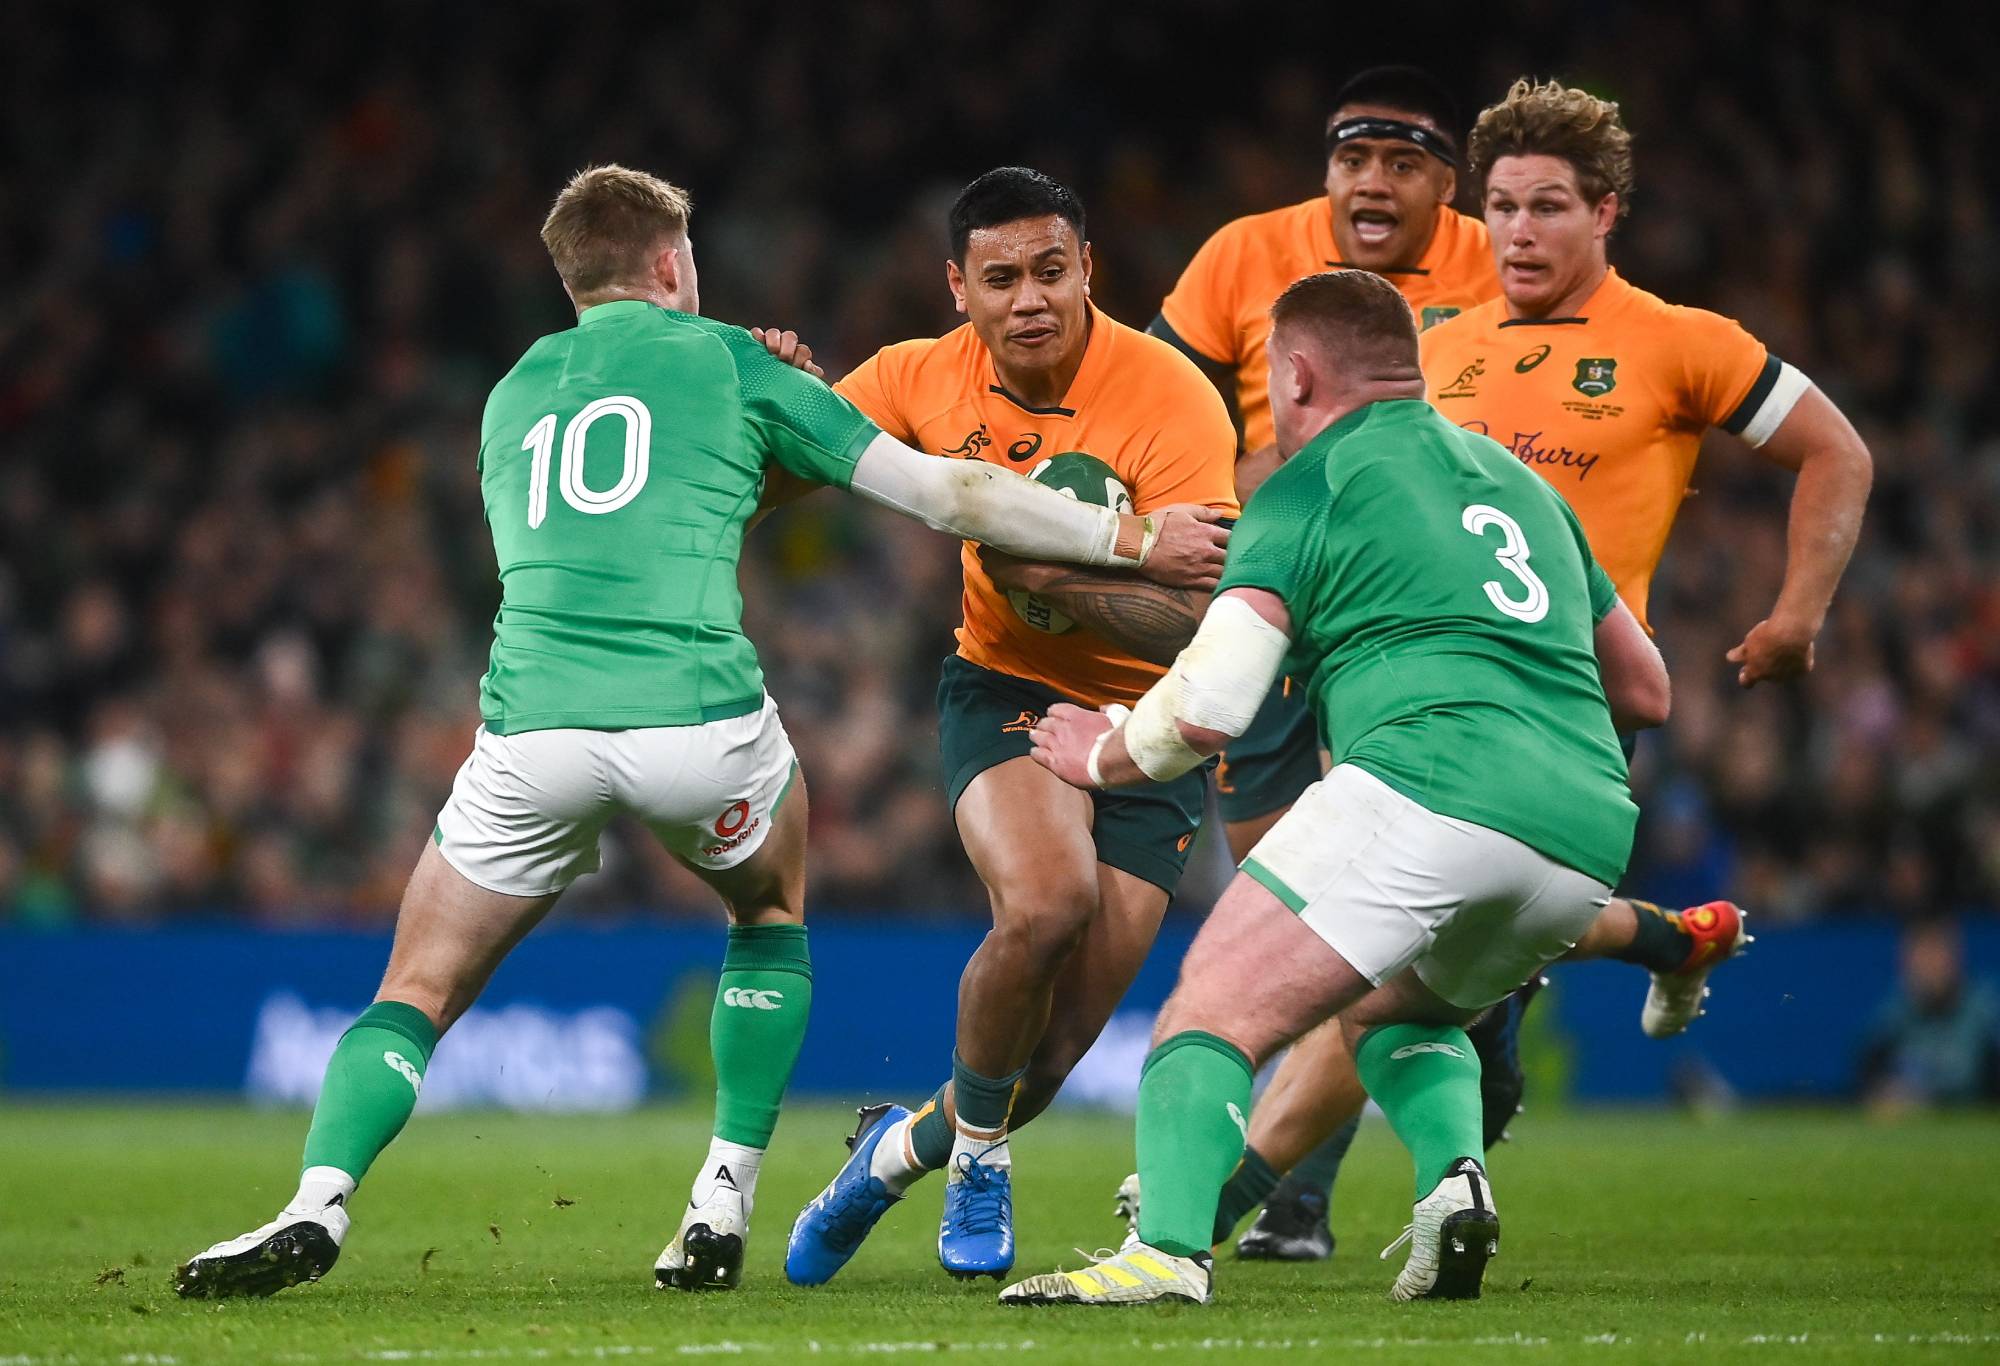 Len Ikitau of Australia is tackled by Jack Crowley, left, and Tadhg Furlong of Ireland during the Bank of Ireland Nations Series match between Ireland and Australia at the Aviva Stadium, Dublin. (Photo by David Fitzgerald/Sportsfile via Getty Images)